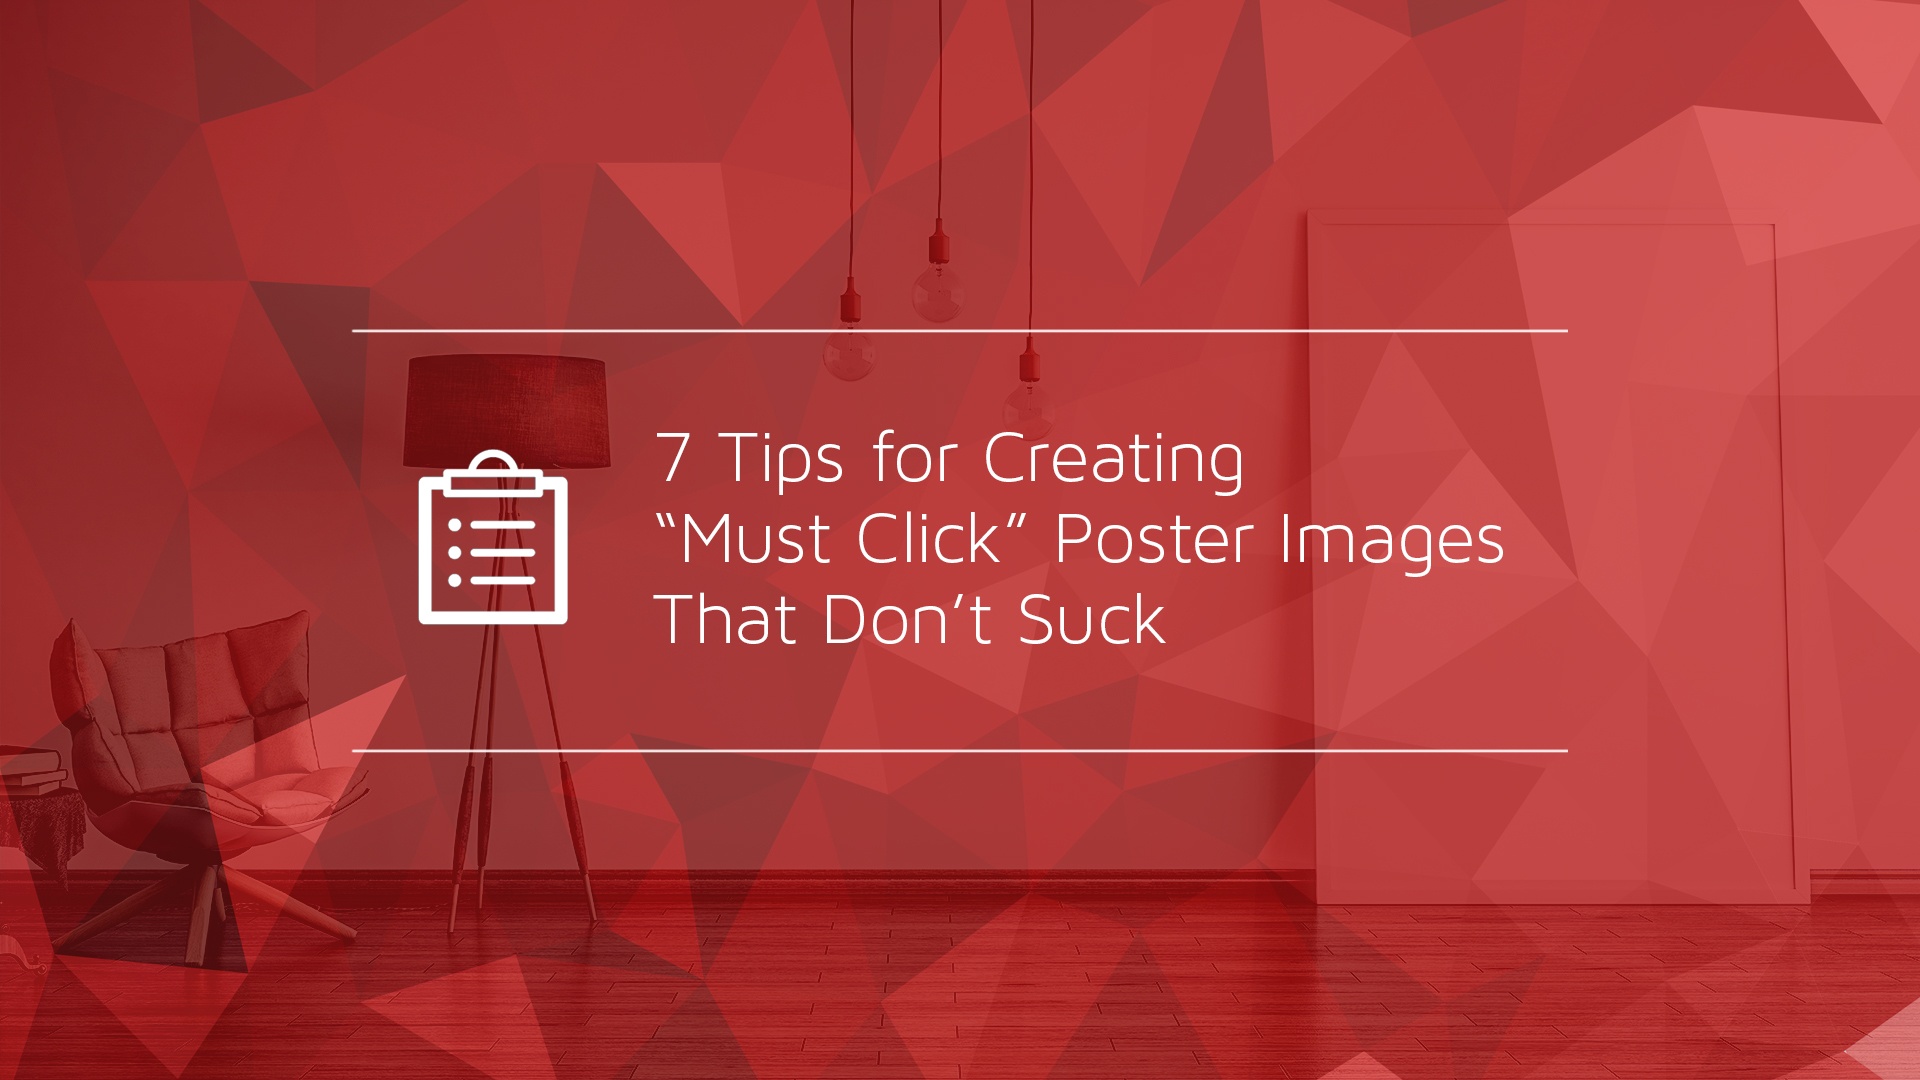 7 Tips for Creating “Must Click” Poster Images That Don’t Suck-1.jpg